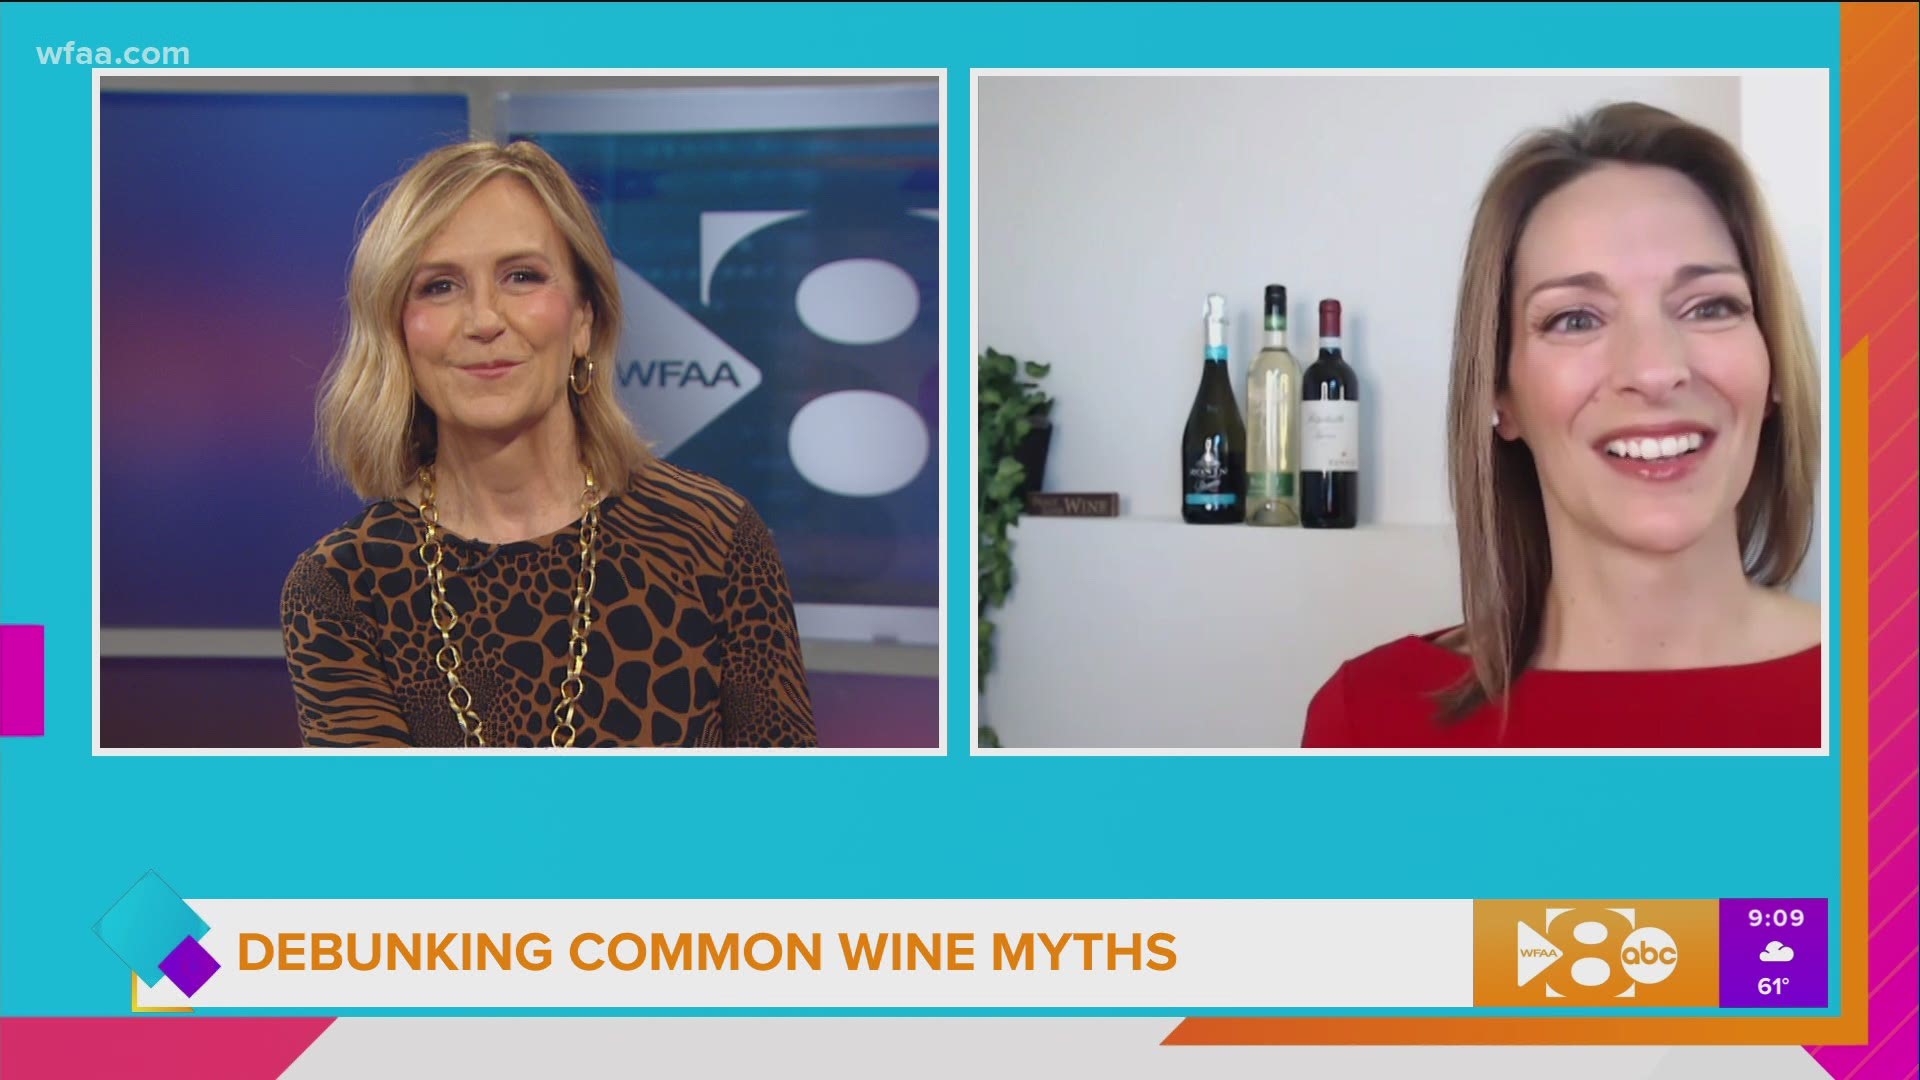 Things you didn't know about wine